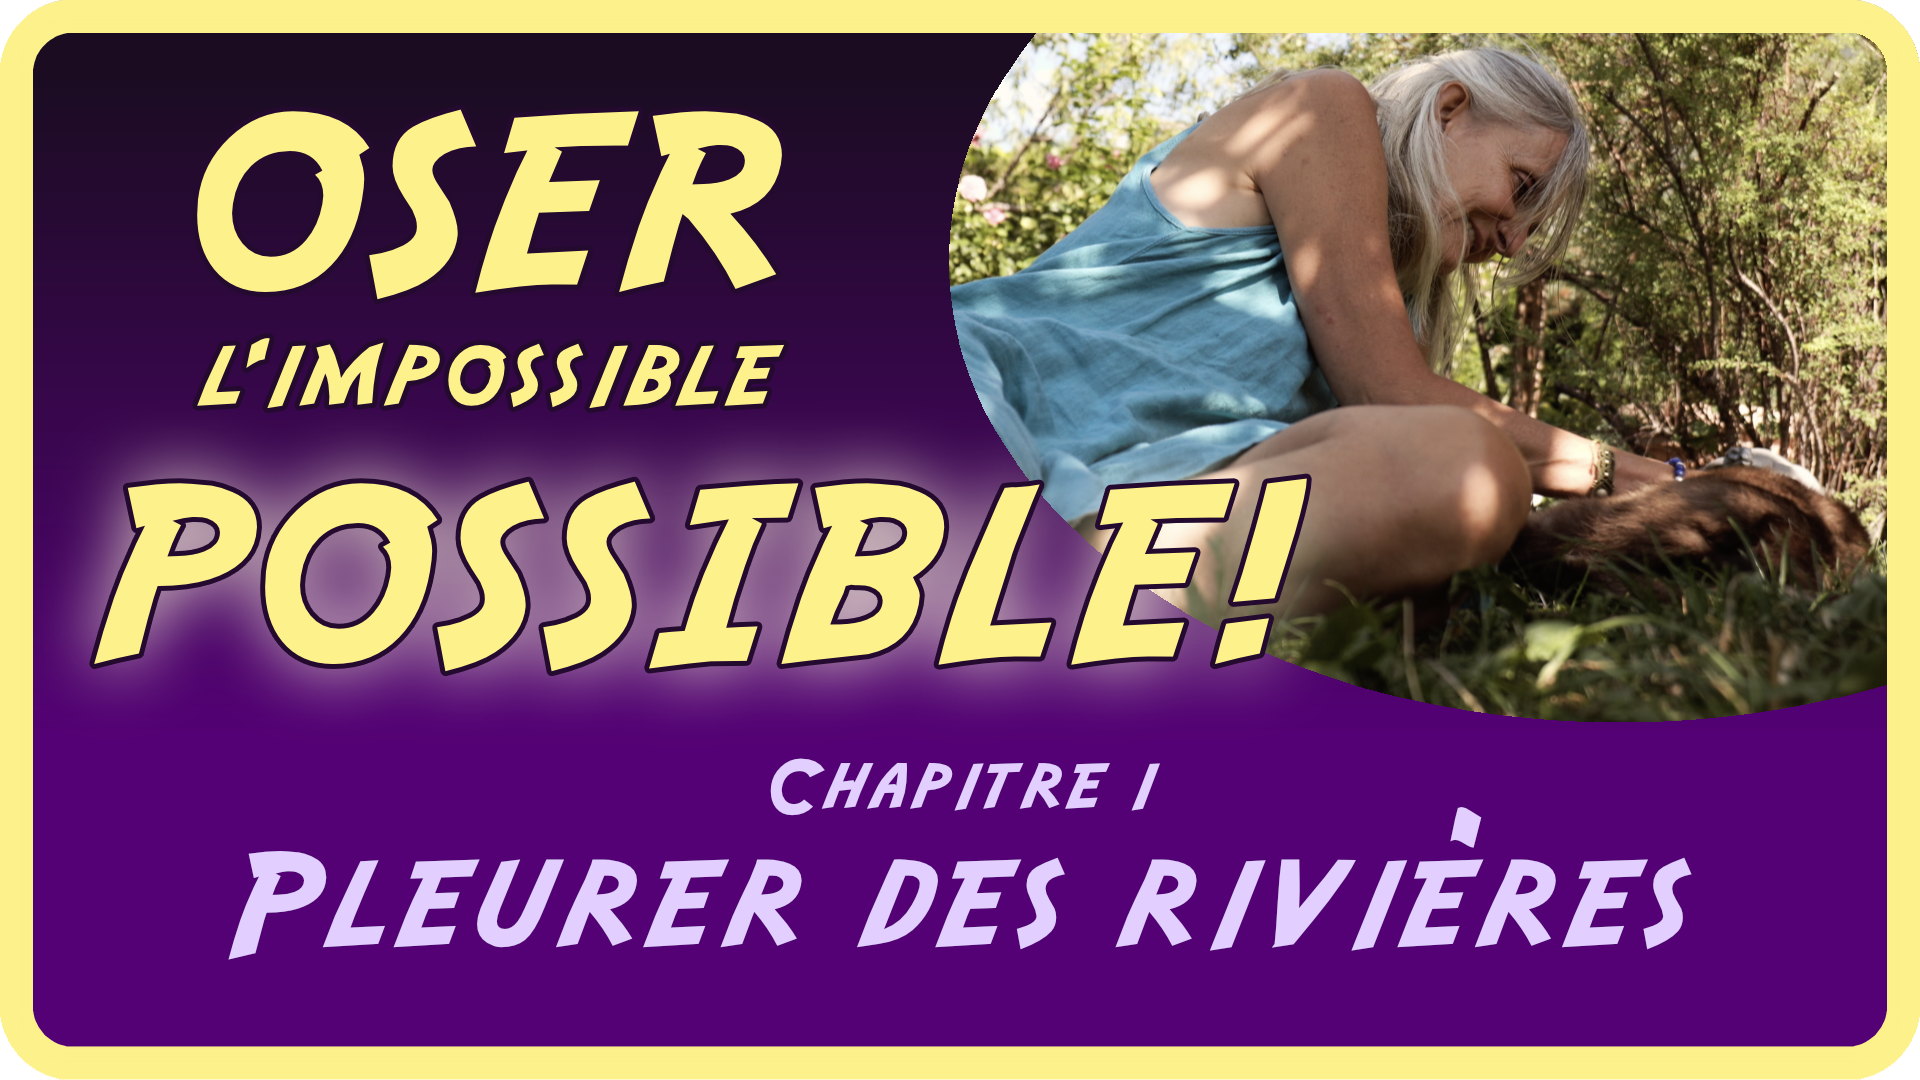 OSER l'impossible POSSIBLE! Chapitre 1/11